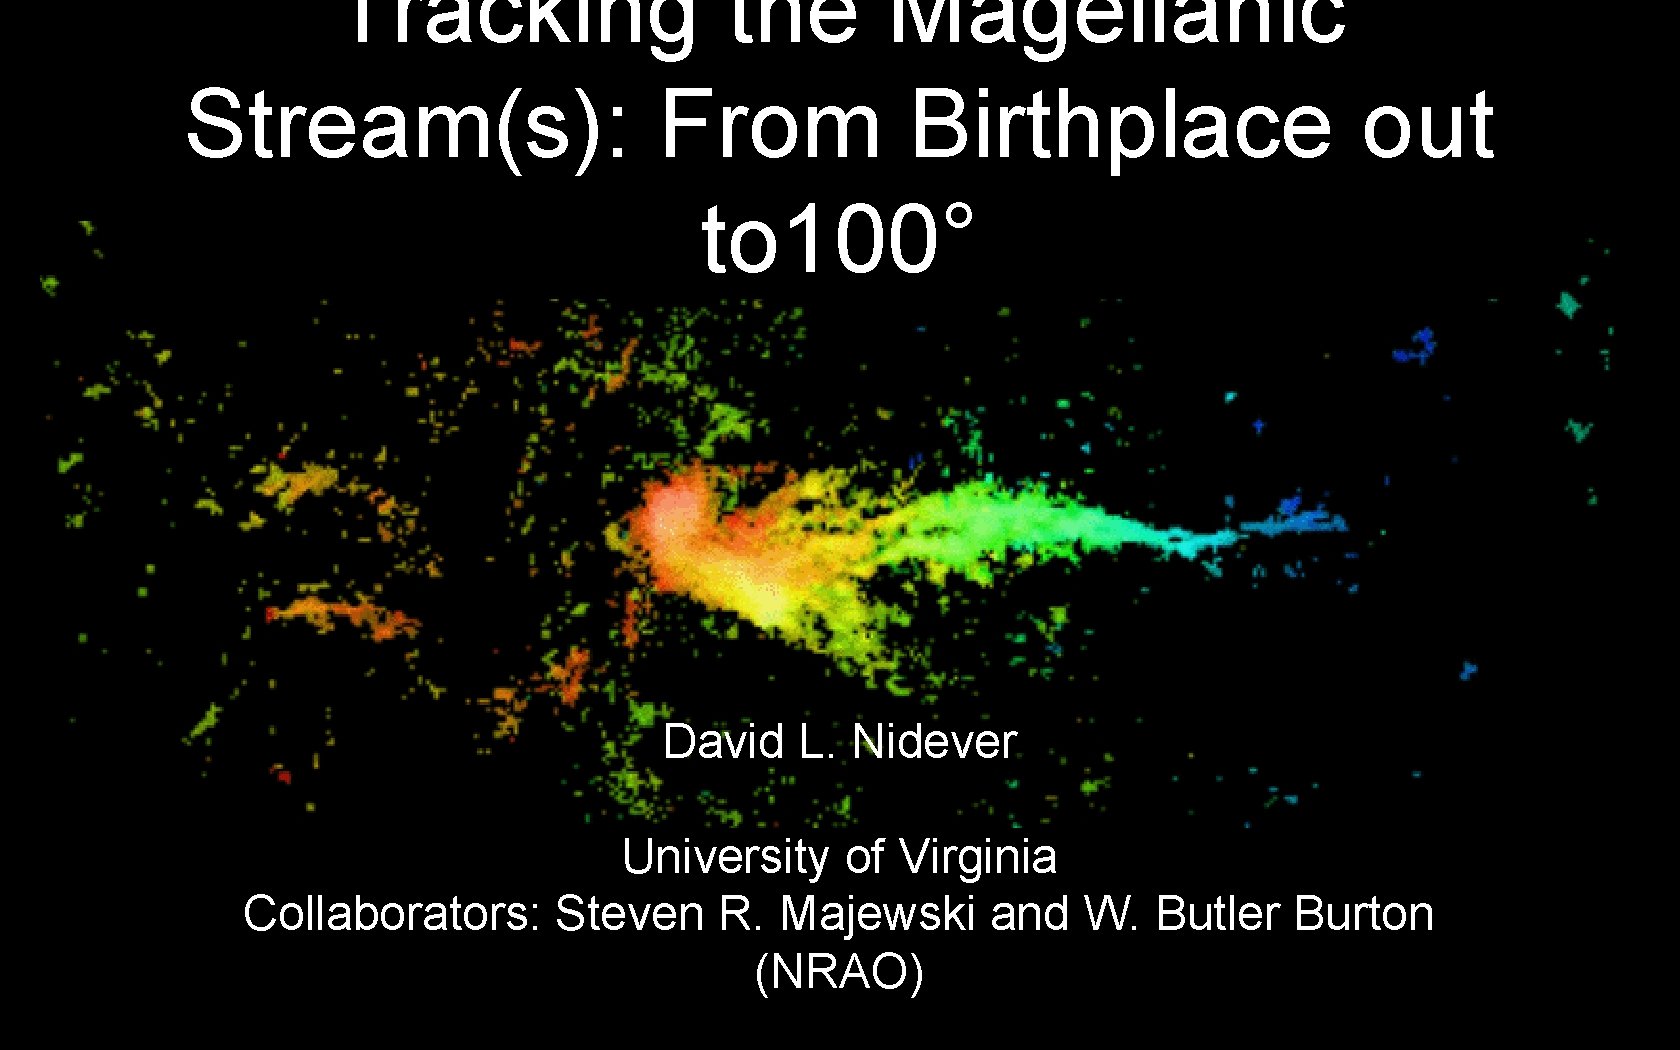 Tracking the Magellanic Stream(s): From Birthplace out to 100° David L. Nidever University of